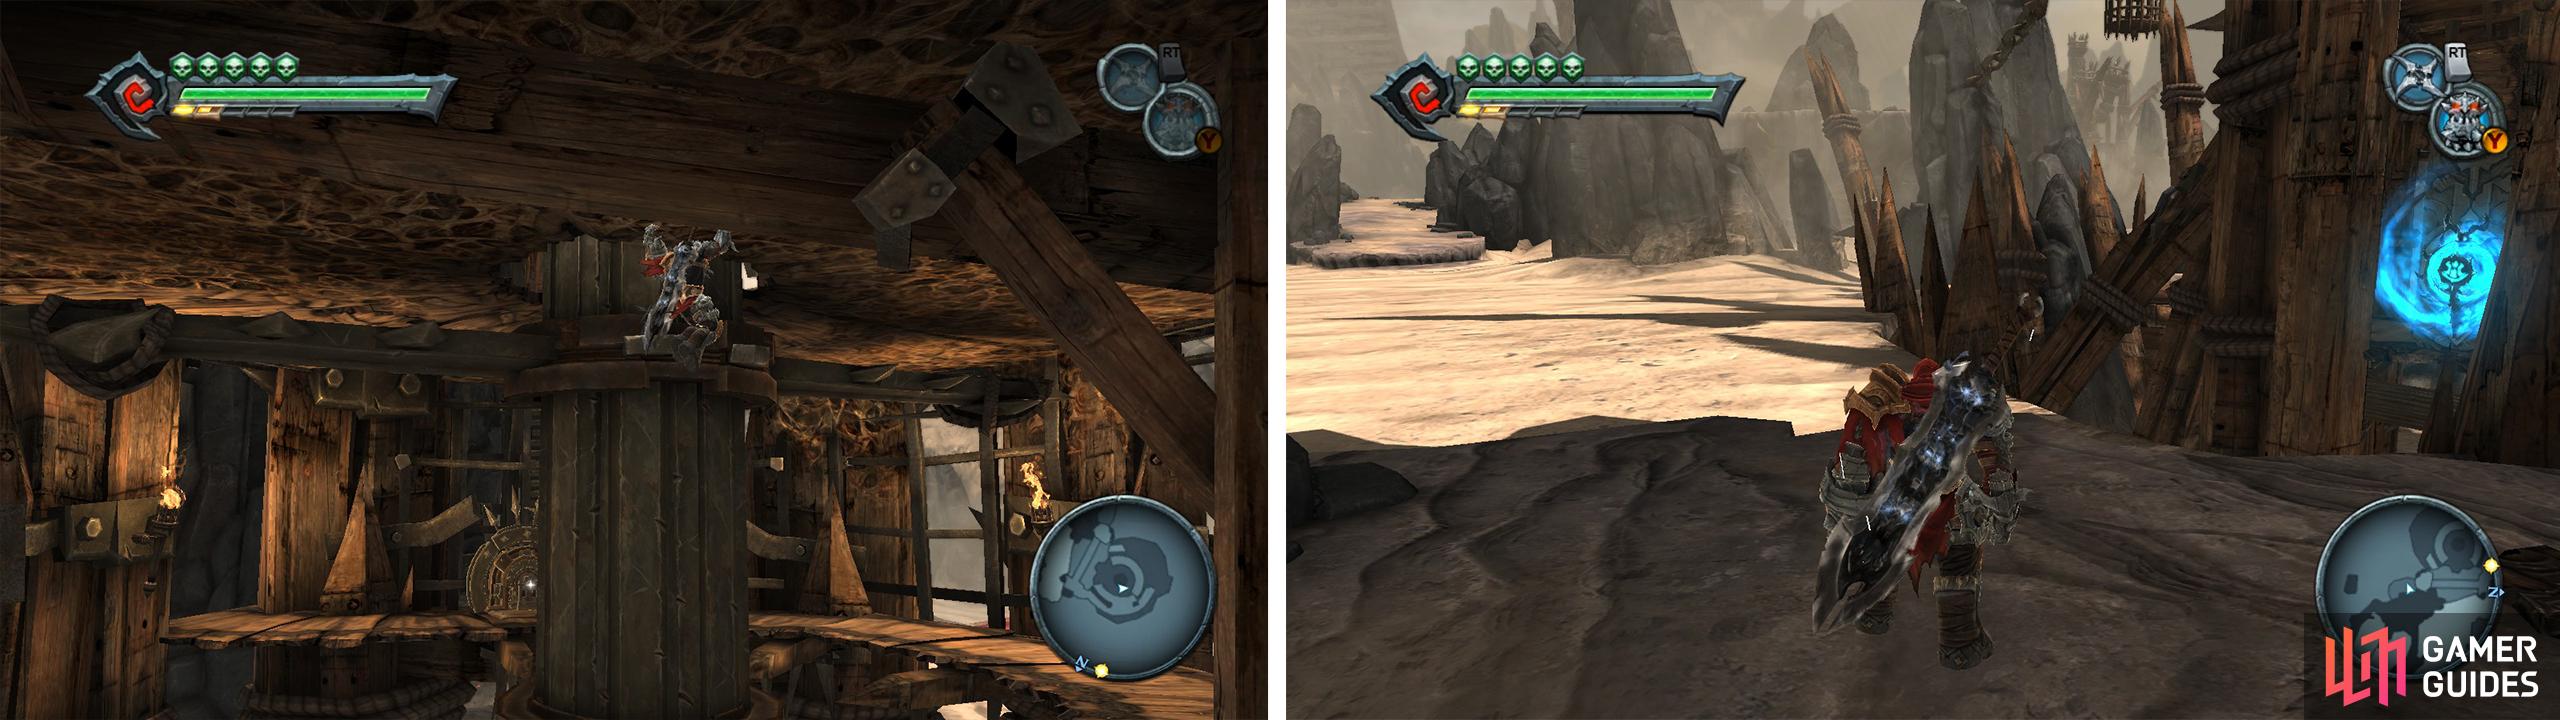 Climb to the top of the first building and hit the switch (left) to lower a chronosphere (right).